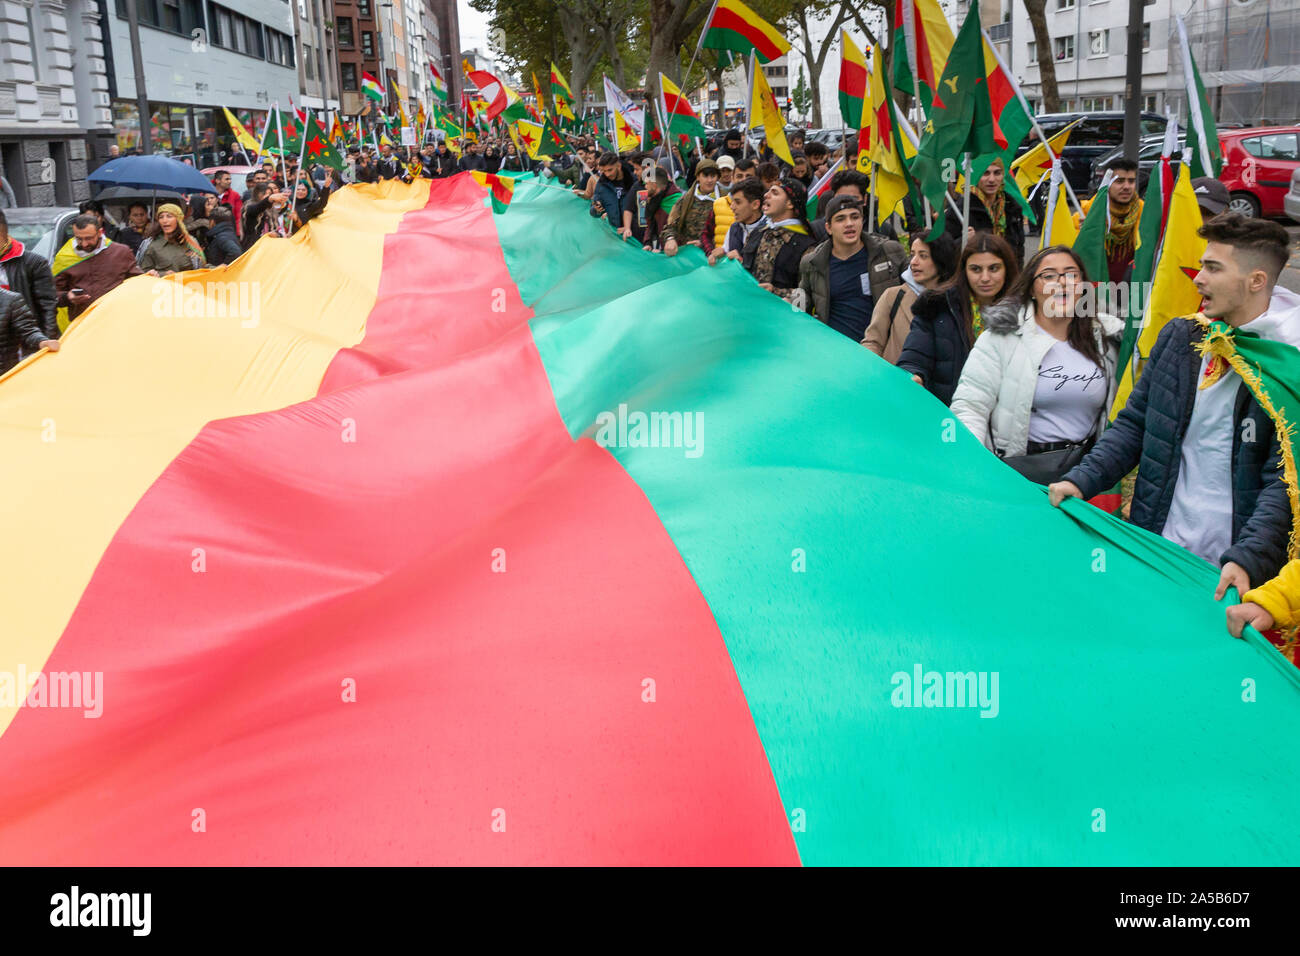 Demonstration on Saturday 2019/10/19 in Cologne against the military offensive of Turkey in Northern Syria with about 10,000 participants. Stock Photo